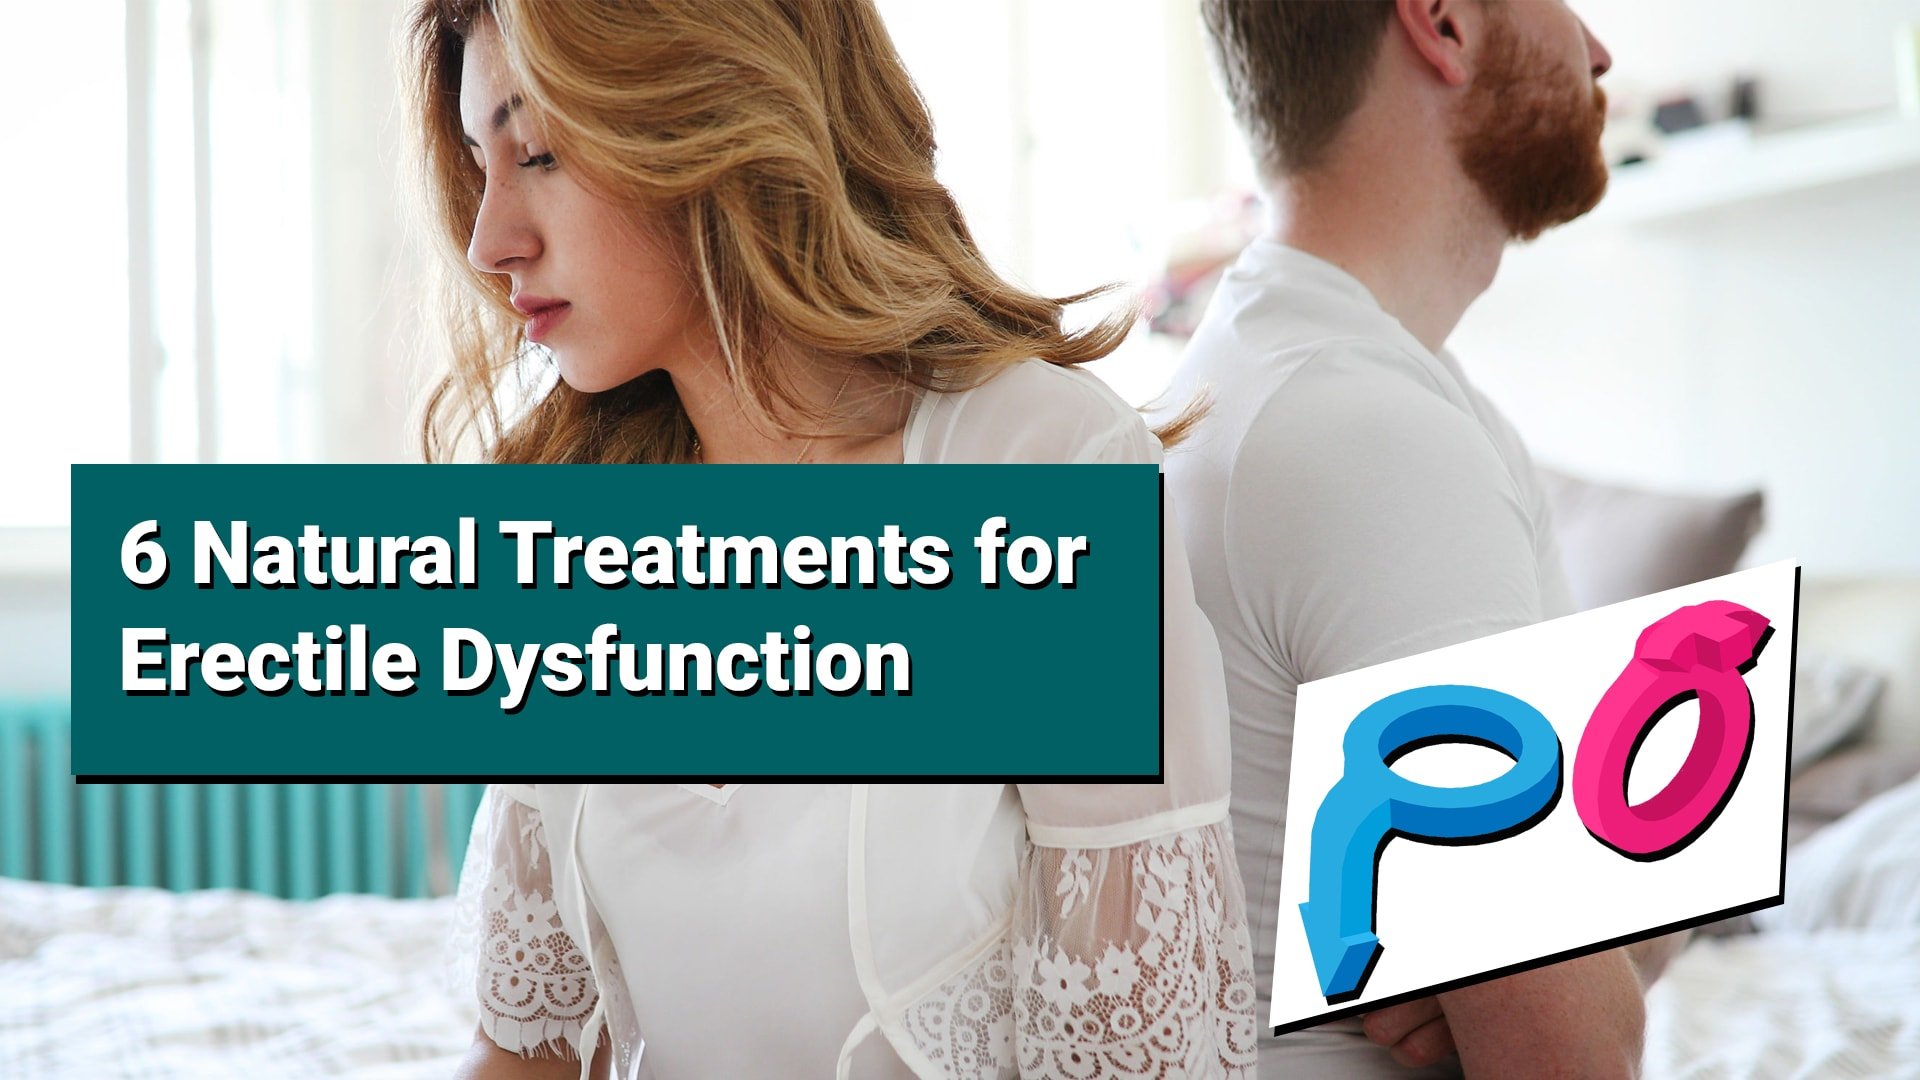 6 Natural Treatments for Erectile Dysfunction